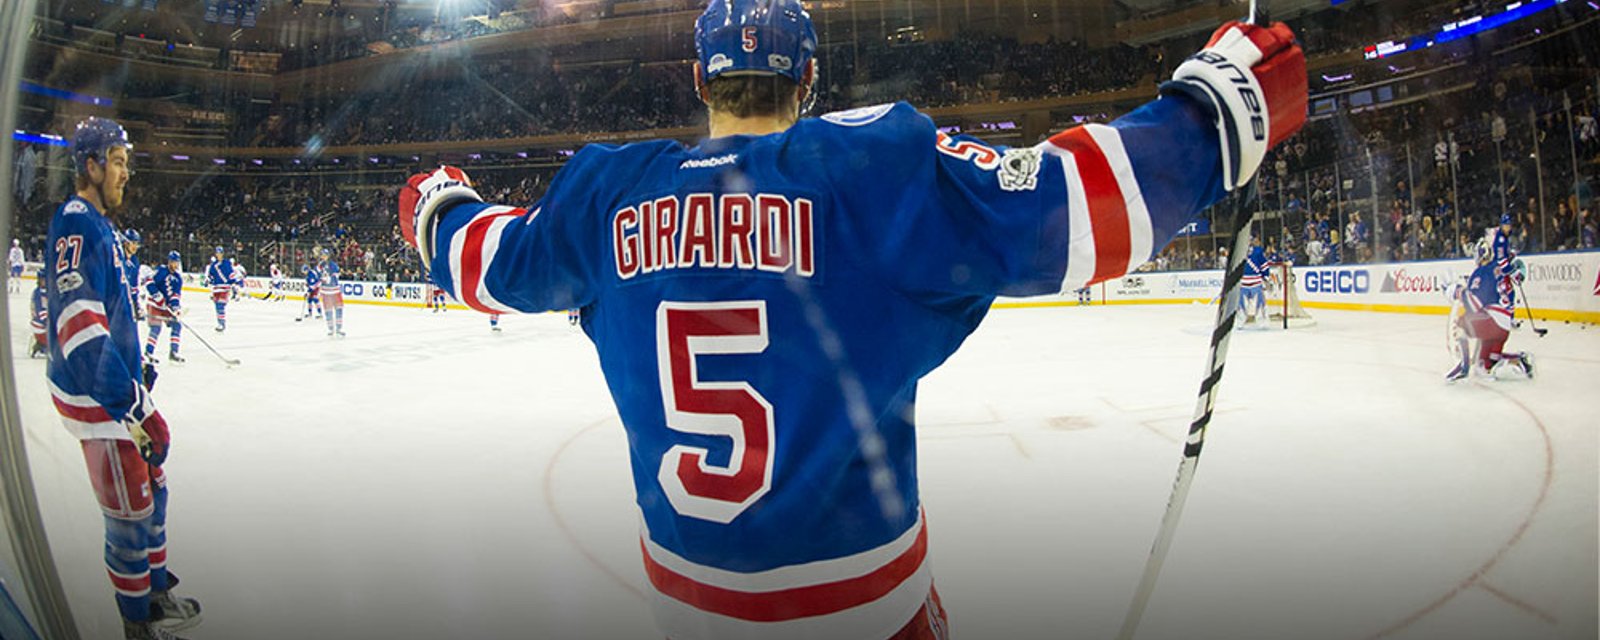 Breaking: Former Rangers’ Girardi set to sign with new team